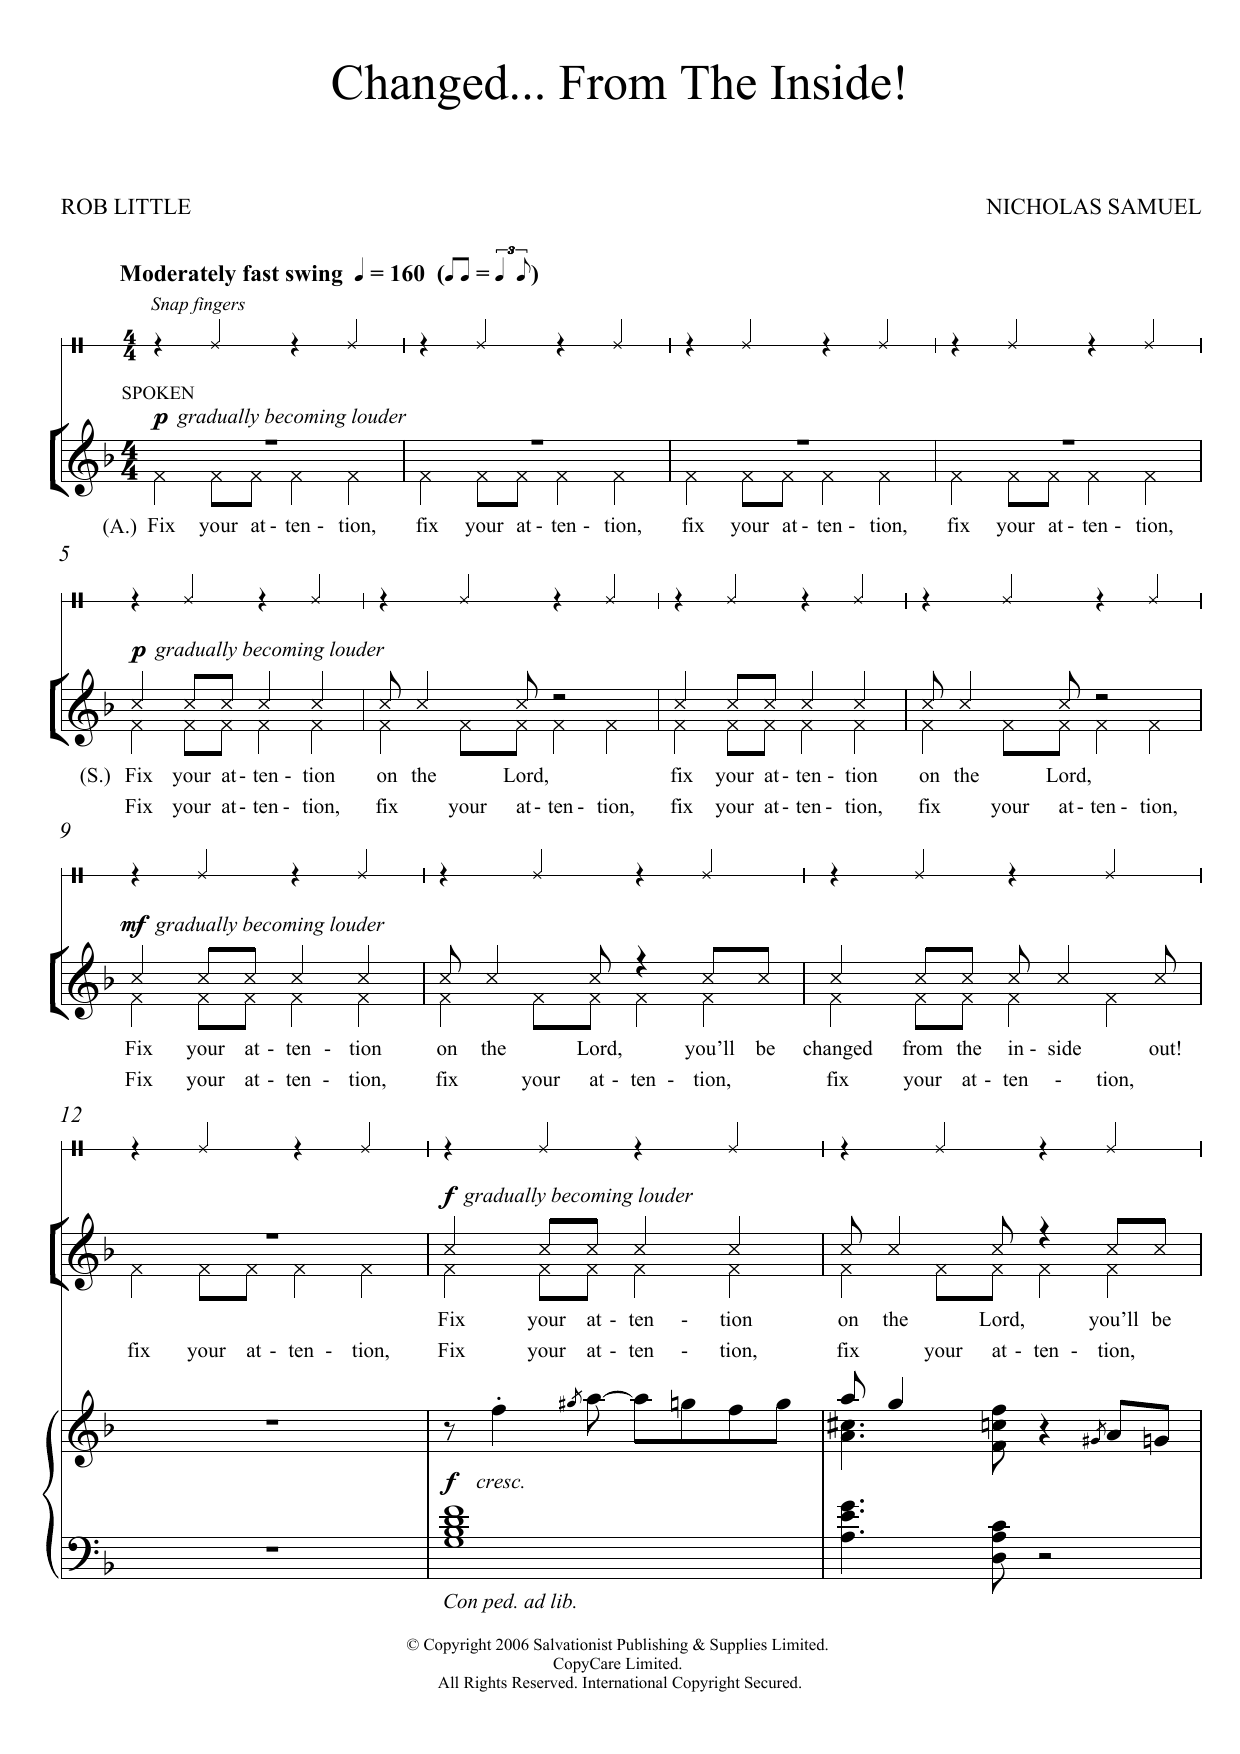 Download The Salvation Army Changed From The Inside Sheet Music